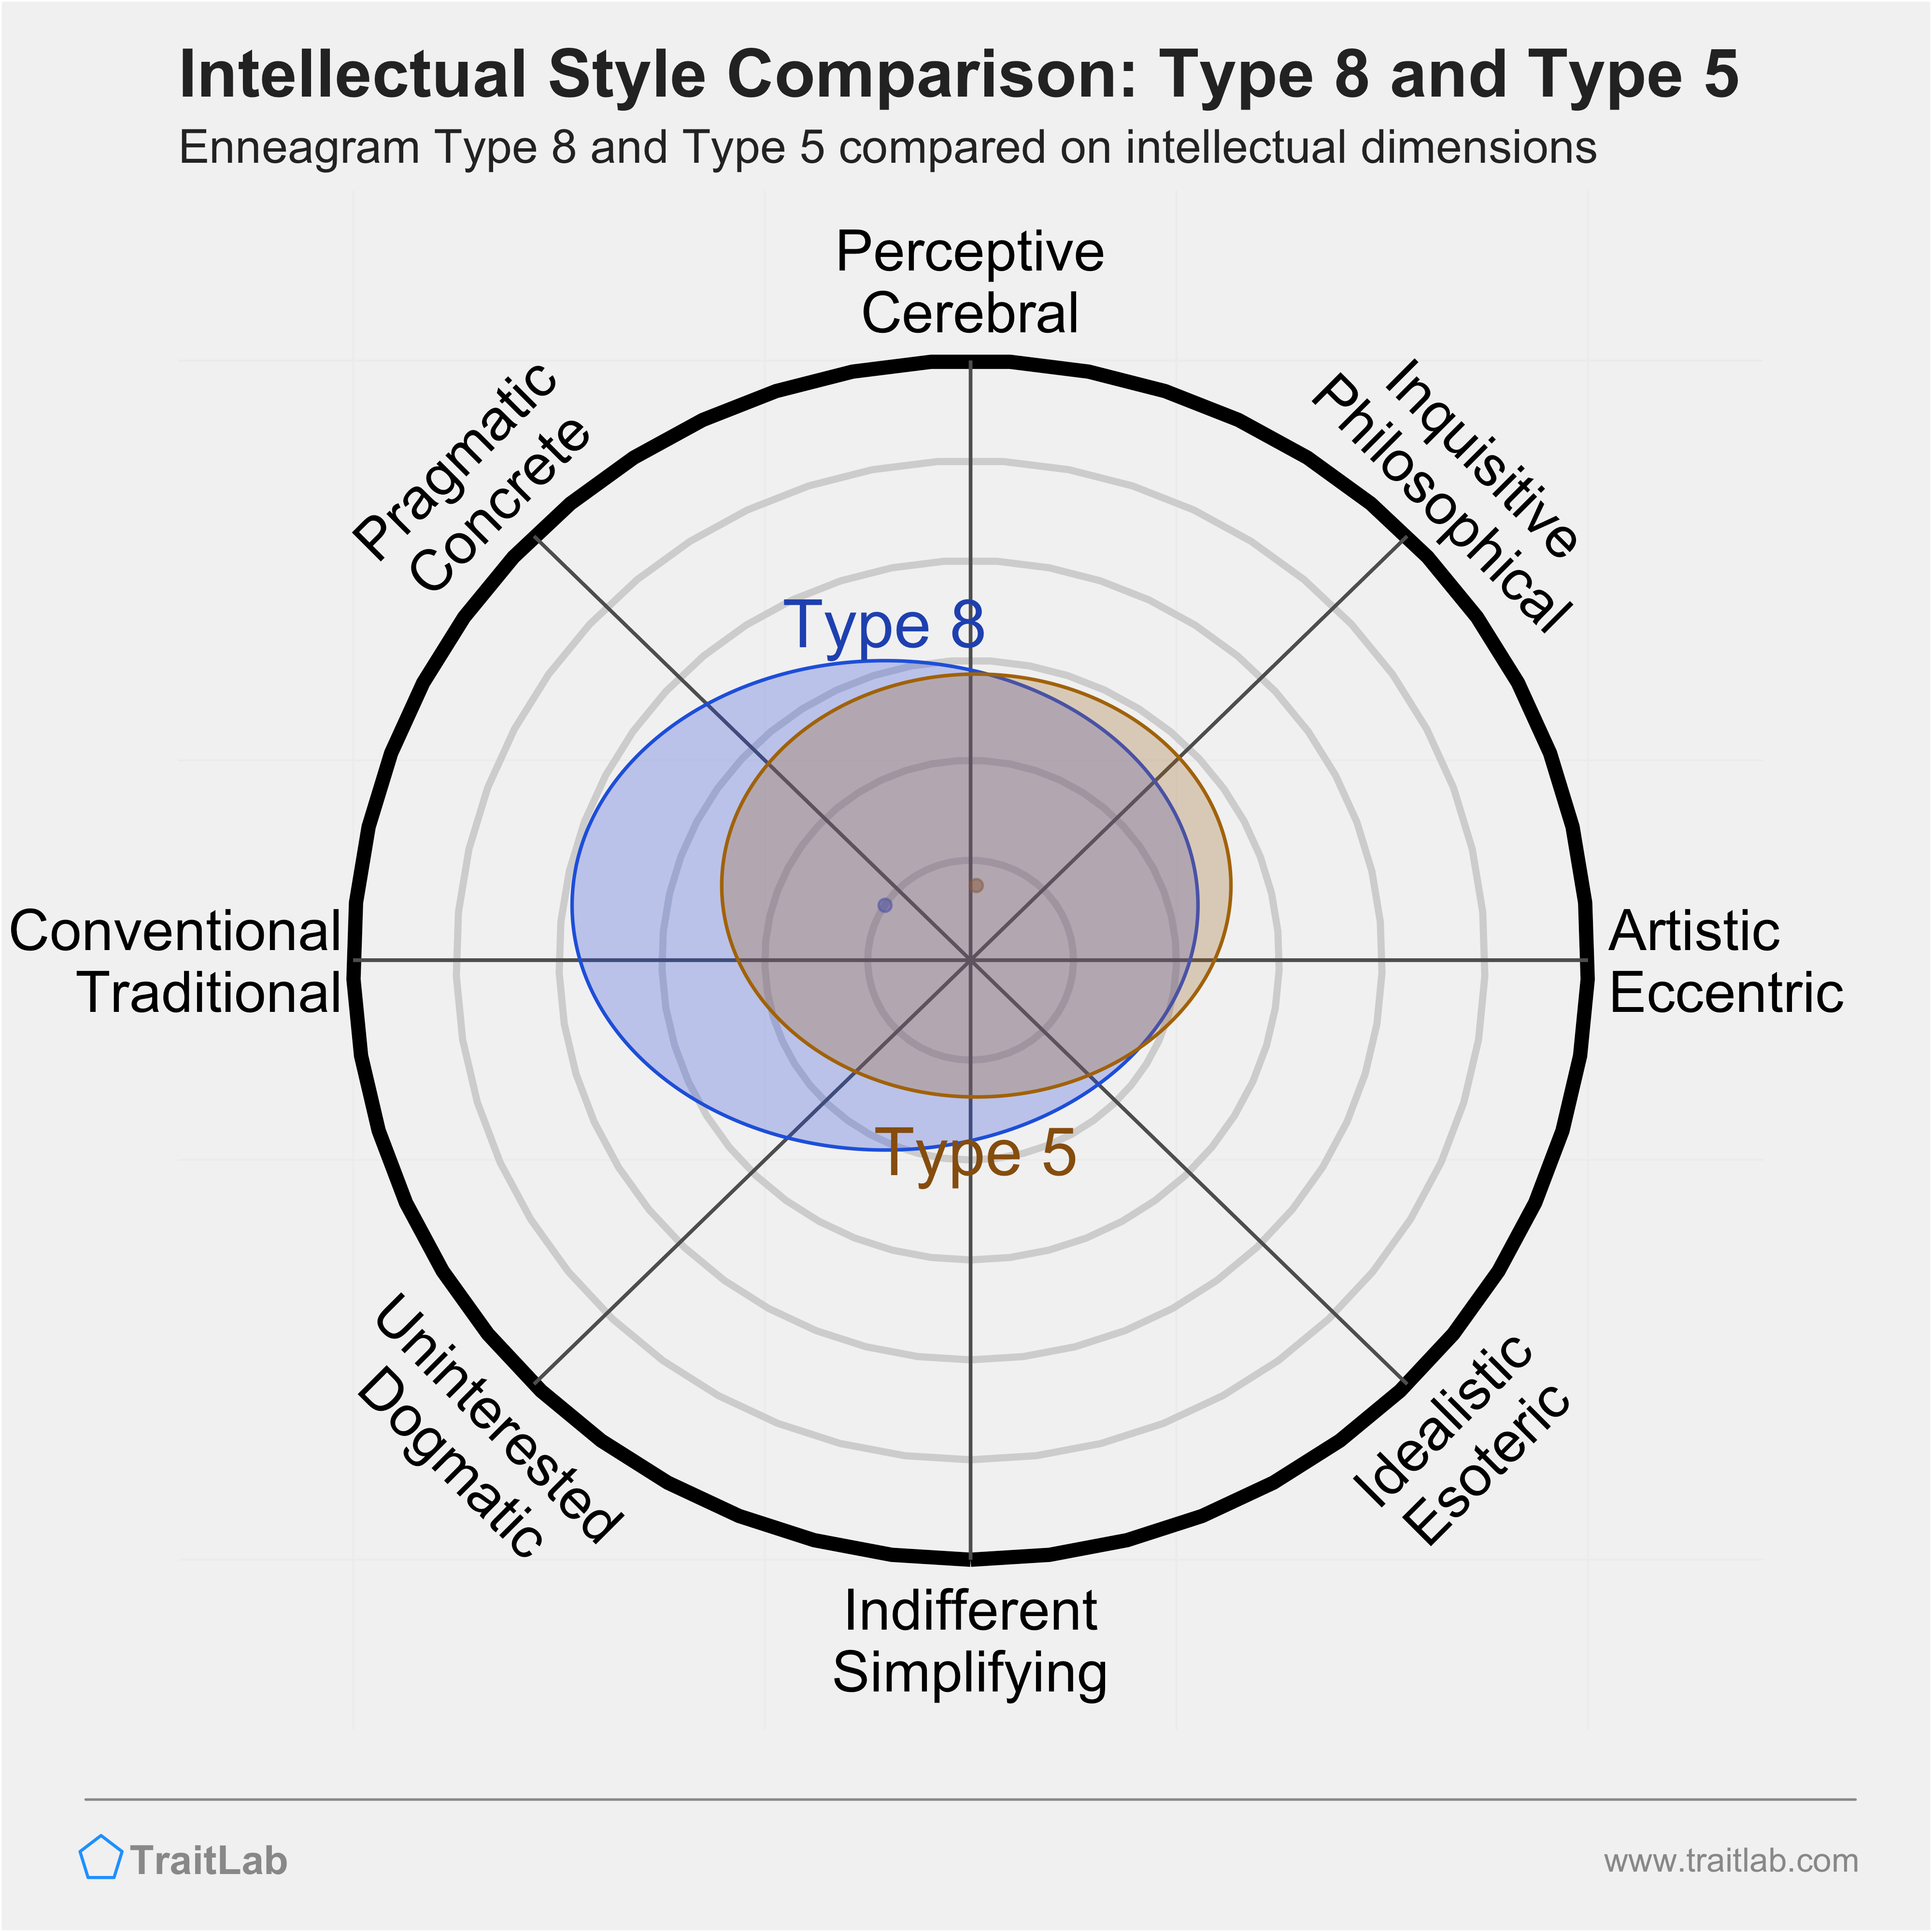 Type 8 and Type 5 comparison across intellectual dimensions